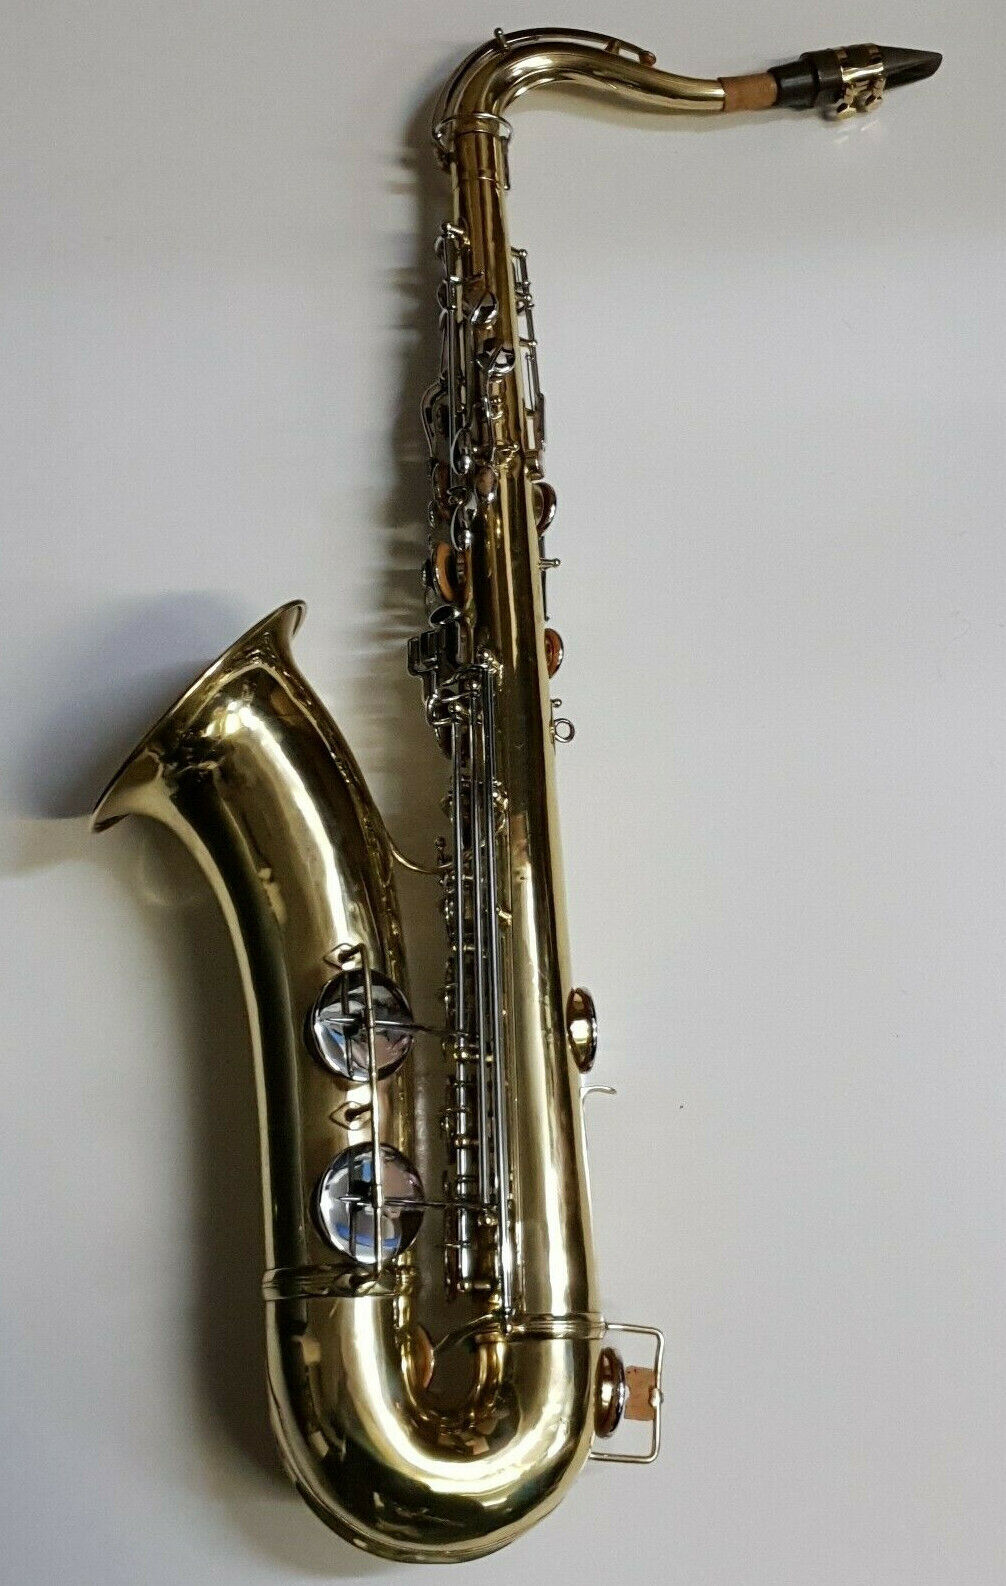 USED Adolphe Saxophone Bb Tenor 673 by Selmer Brass Body & Hard Case Full Outfit